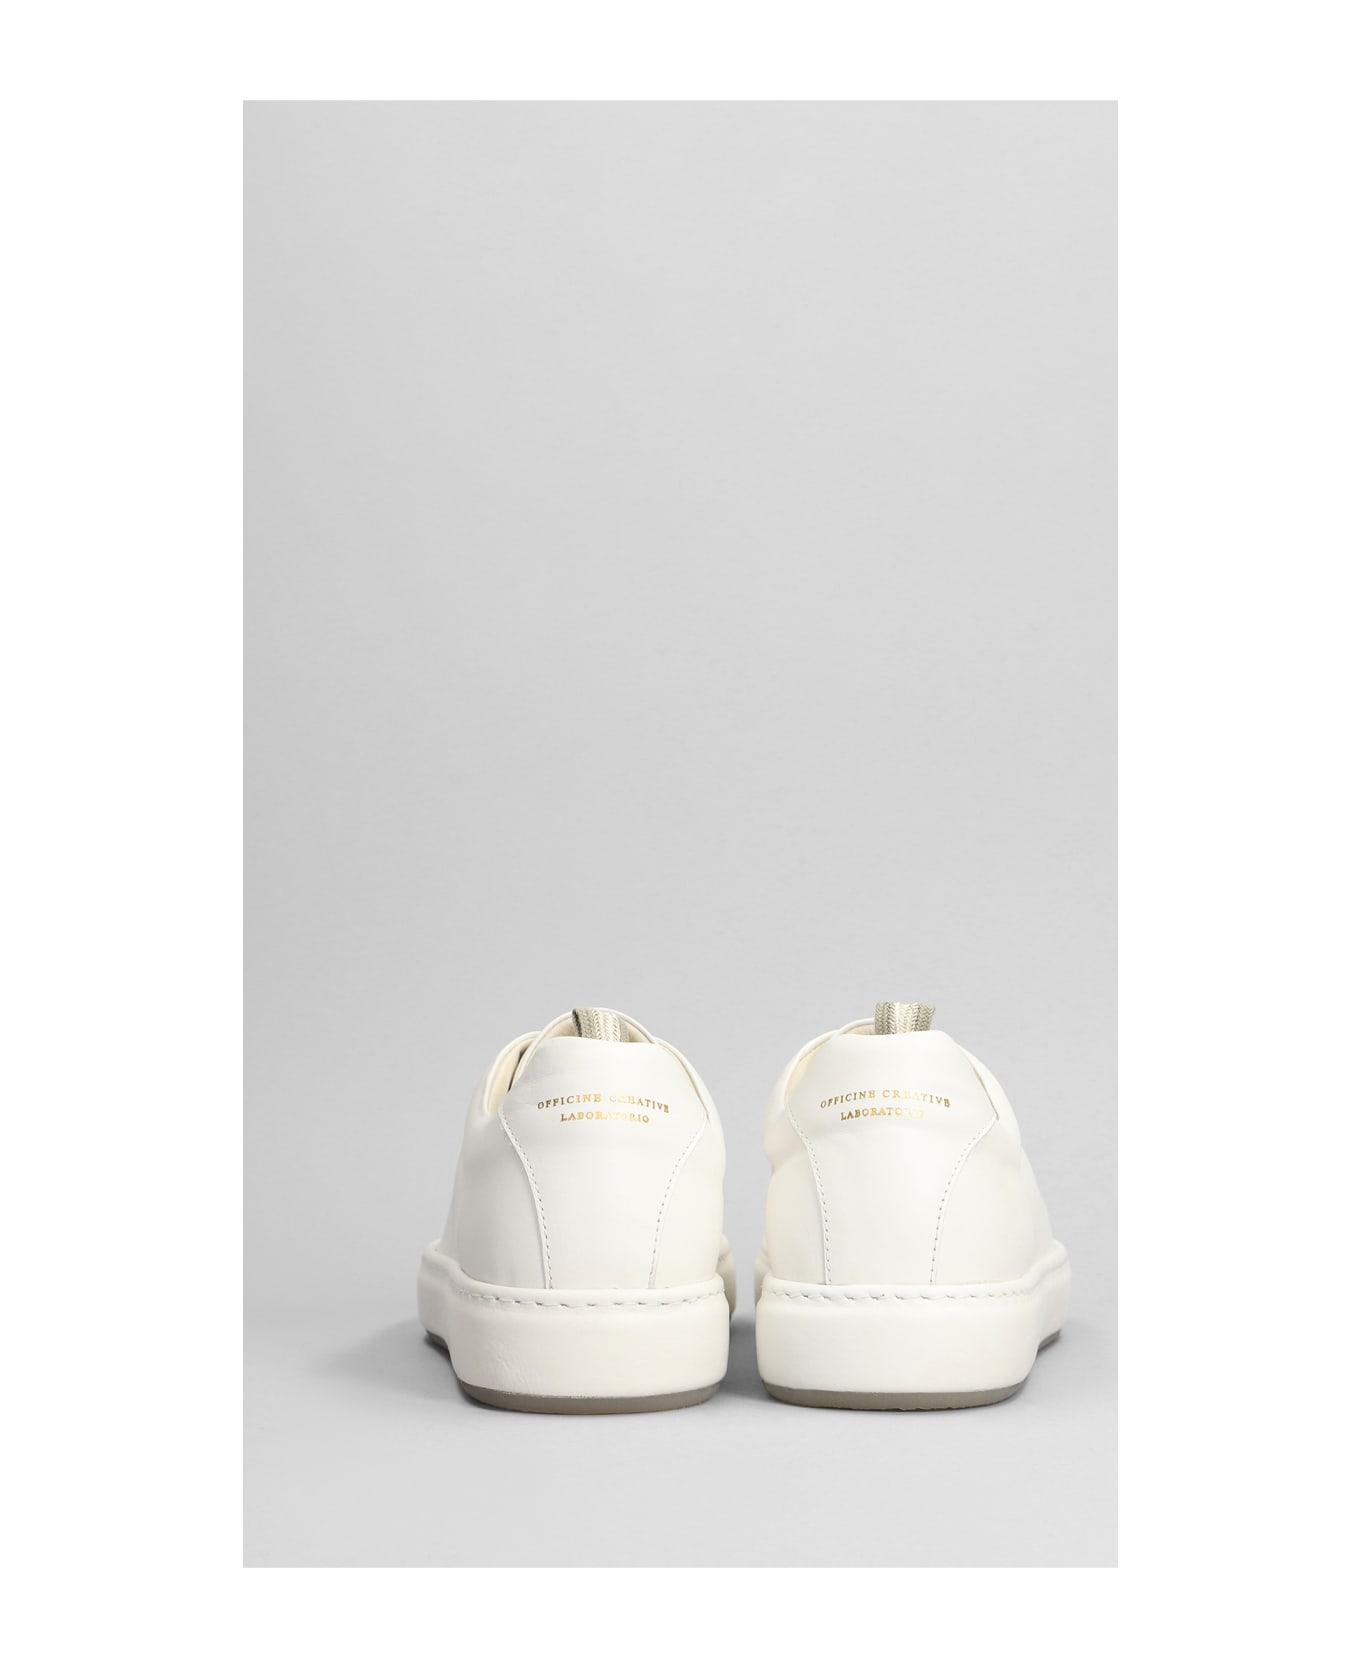 Officine Creative Covered 001 Sneakers In White Leather - white スニーカー